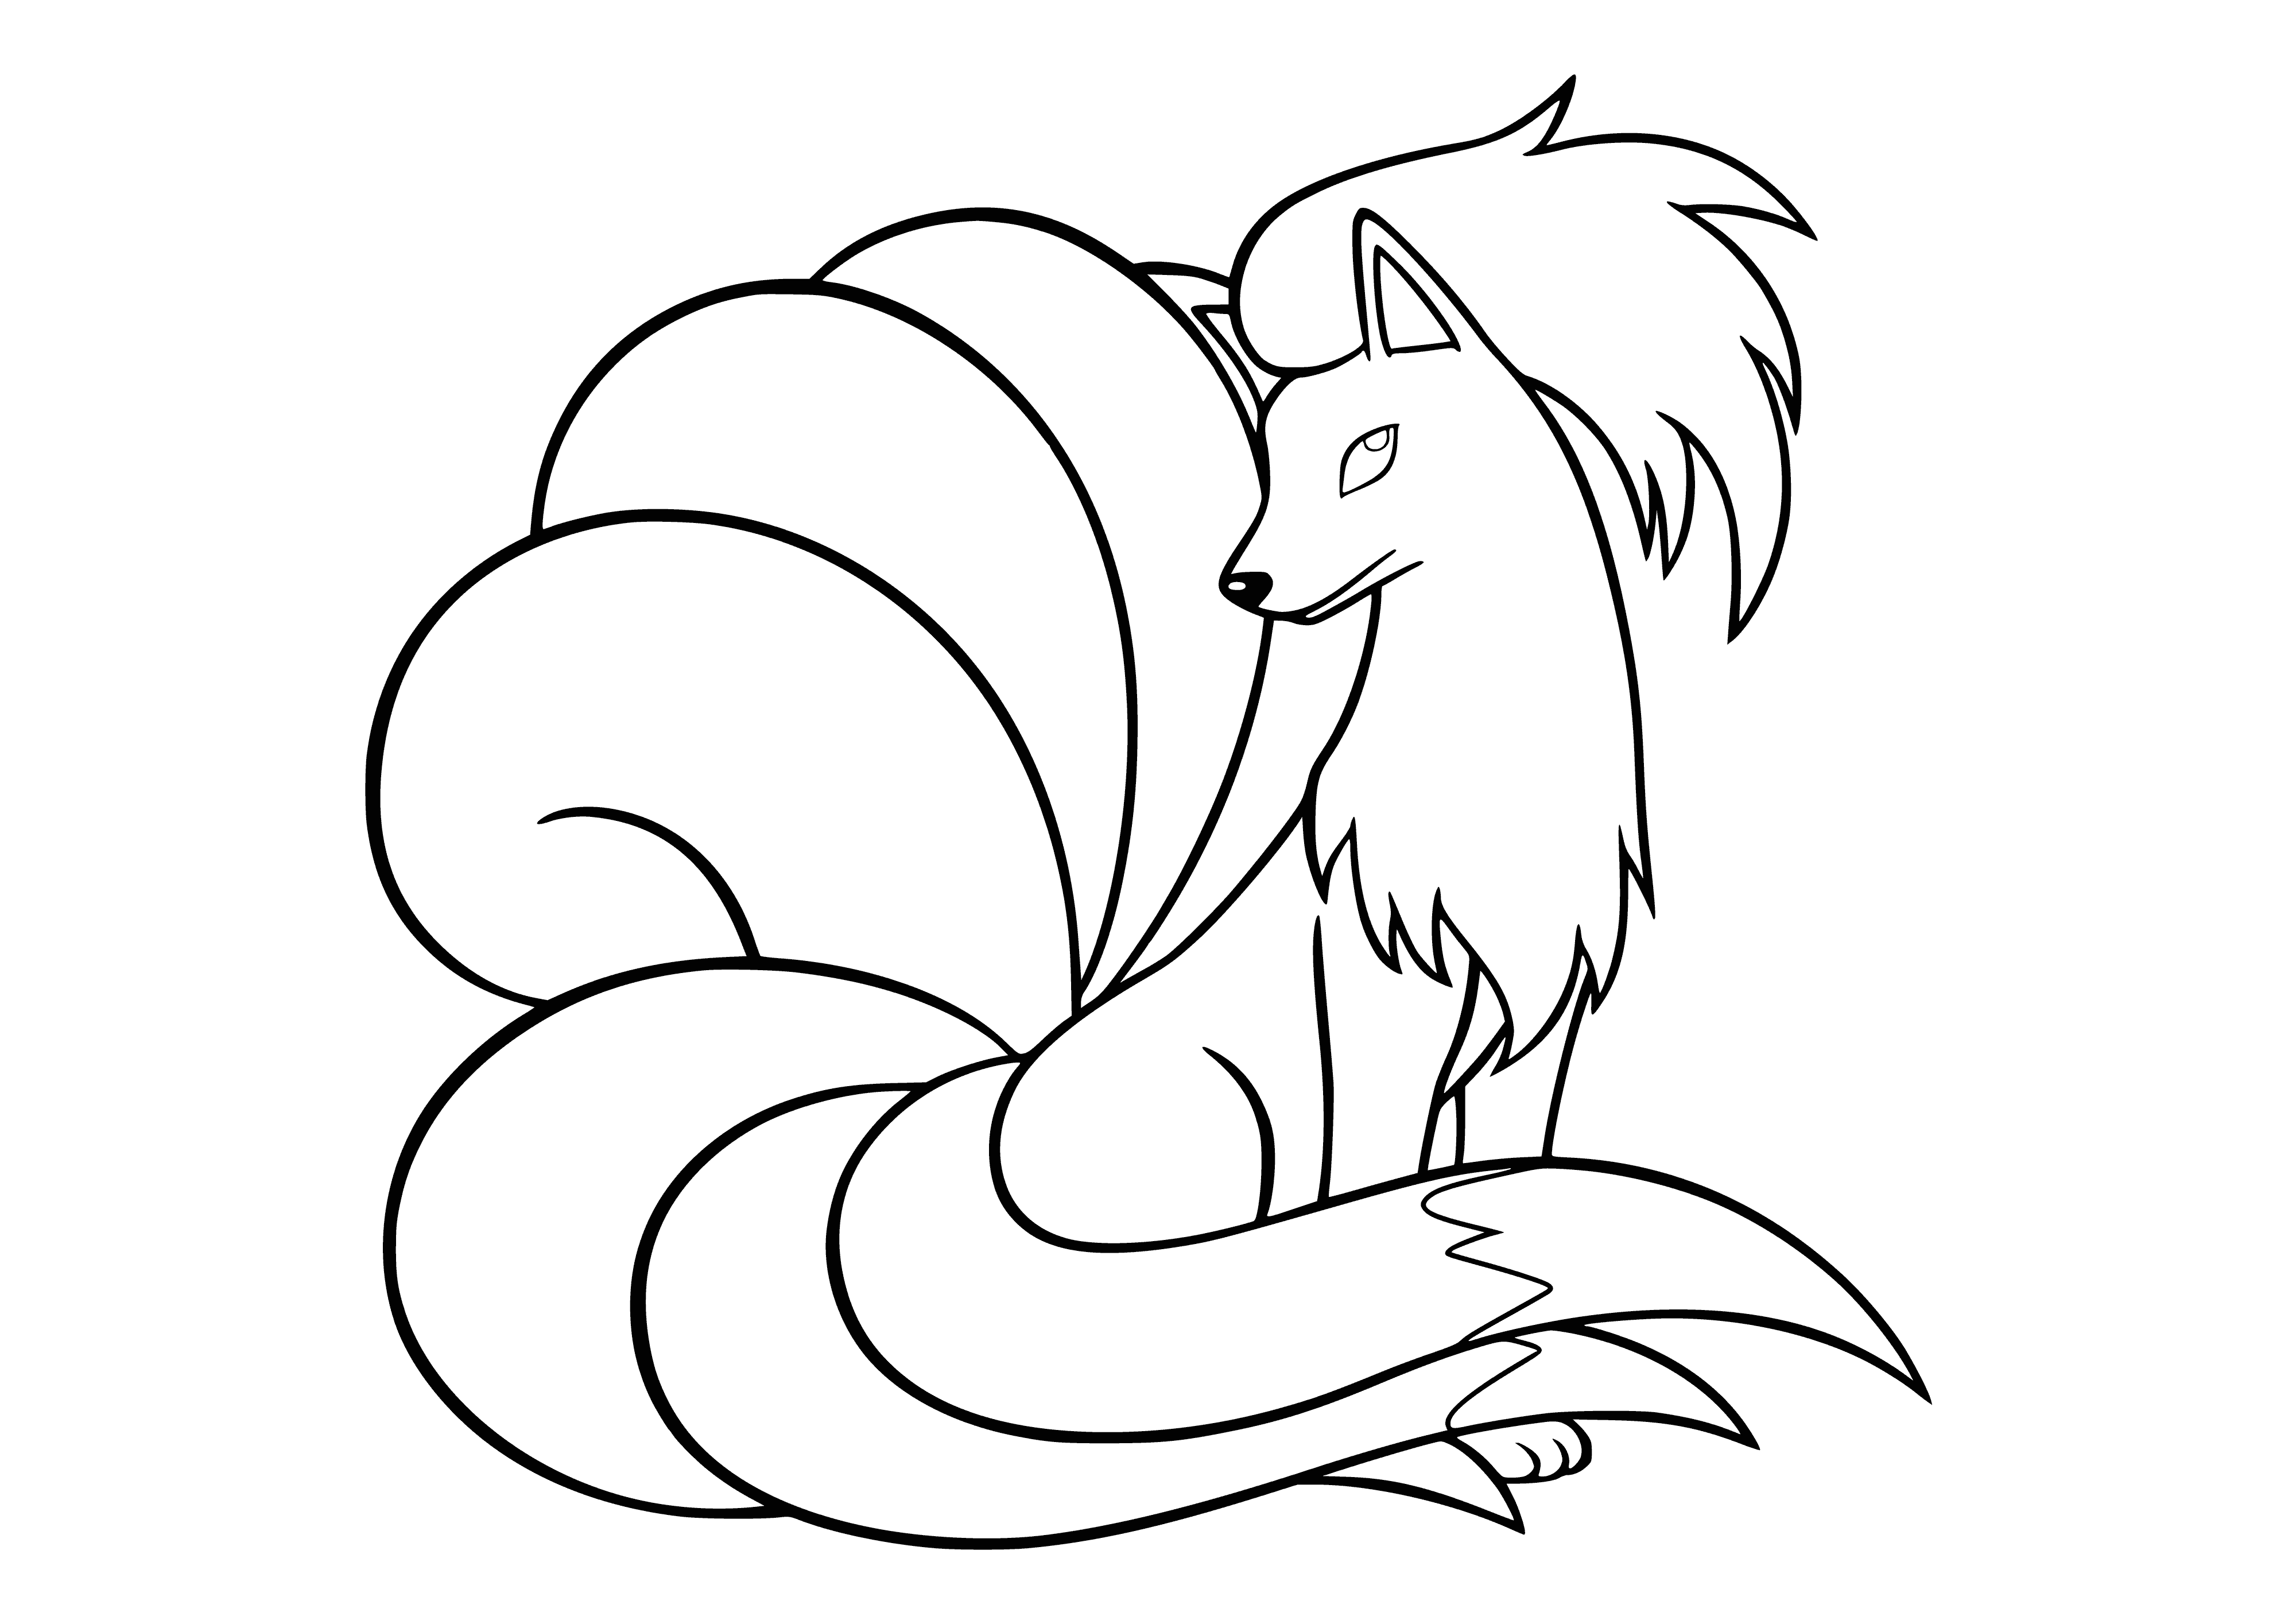 coloring page: Legendary fox Pokémon said to live 1,000 years w/ 9 tails, each said to have unique power. Very intelligent & can learn many moves.